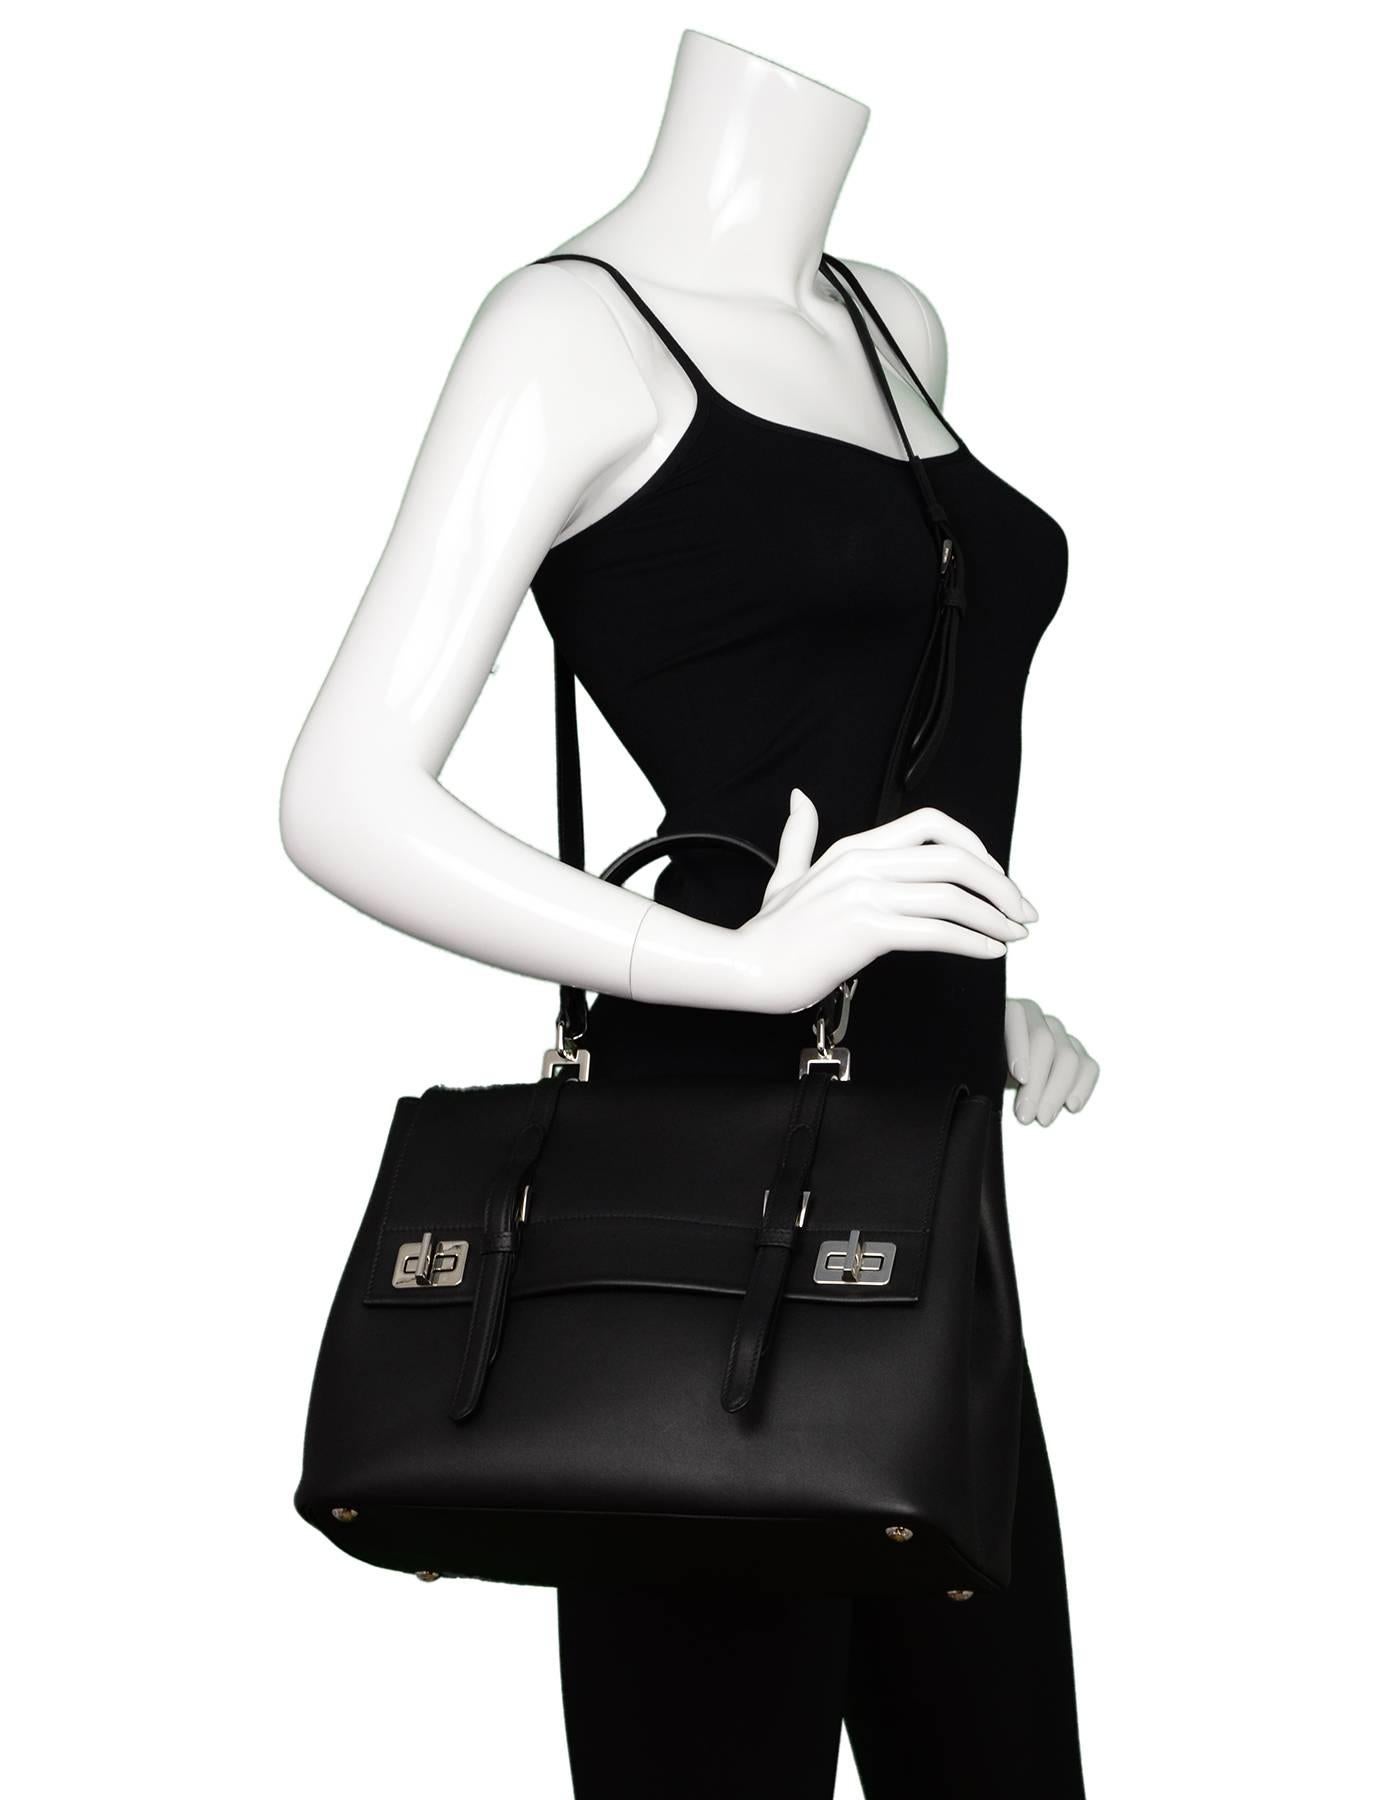 Prada Black Pattina City Calf Satchel Bag
Features optional shoulder strap

Made In: Italy
Color: Black, silver
Hardware: Silvertone
Materials: Calfskin leather, metal
Lining: Black leather
Closure/Opening: Flap top with two twist lock